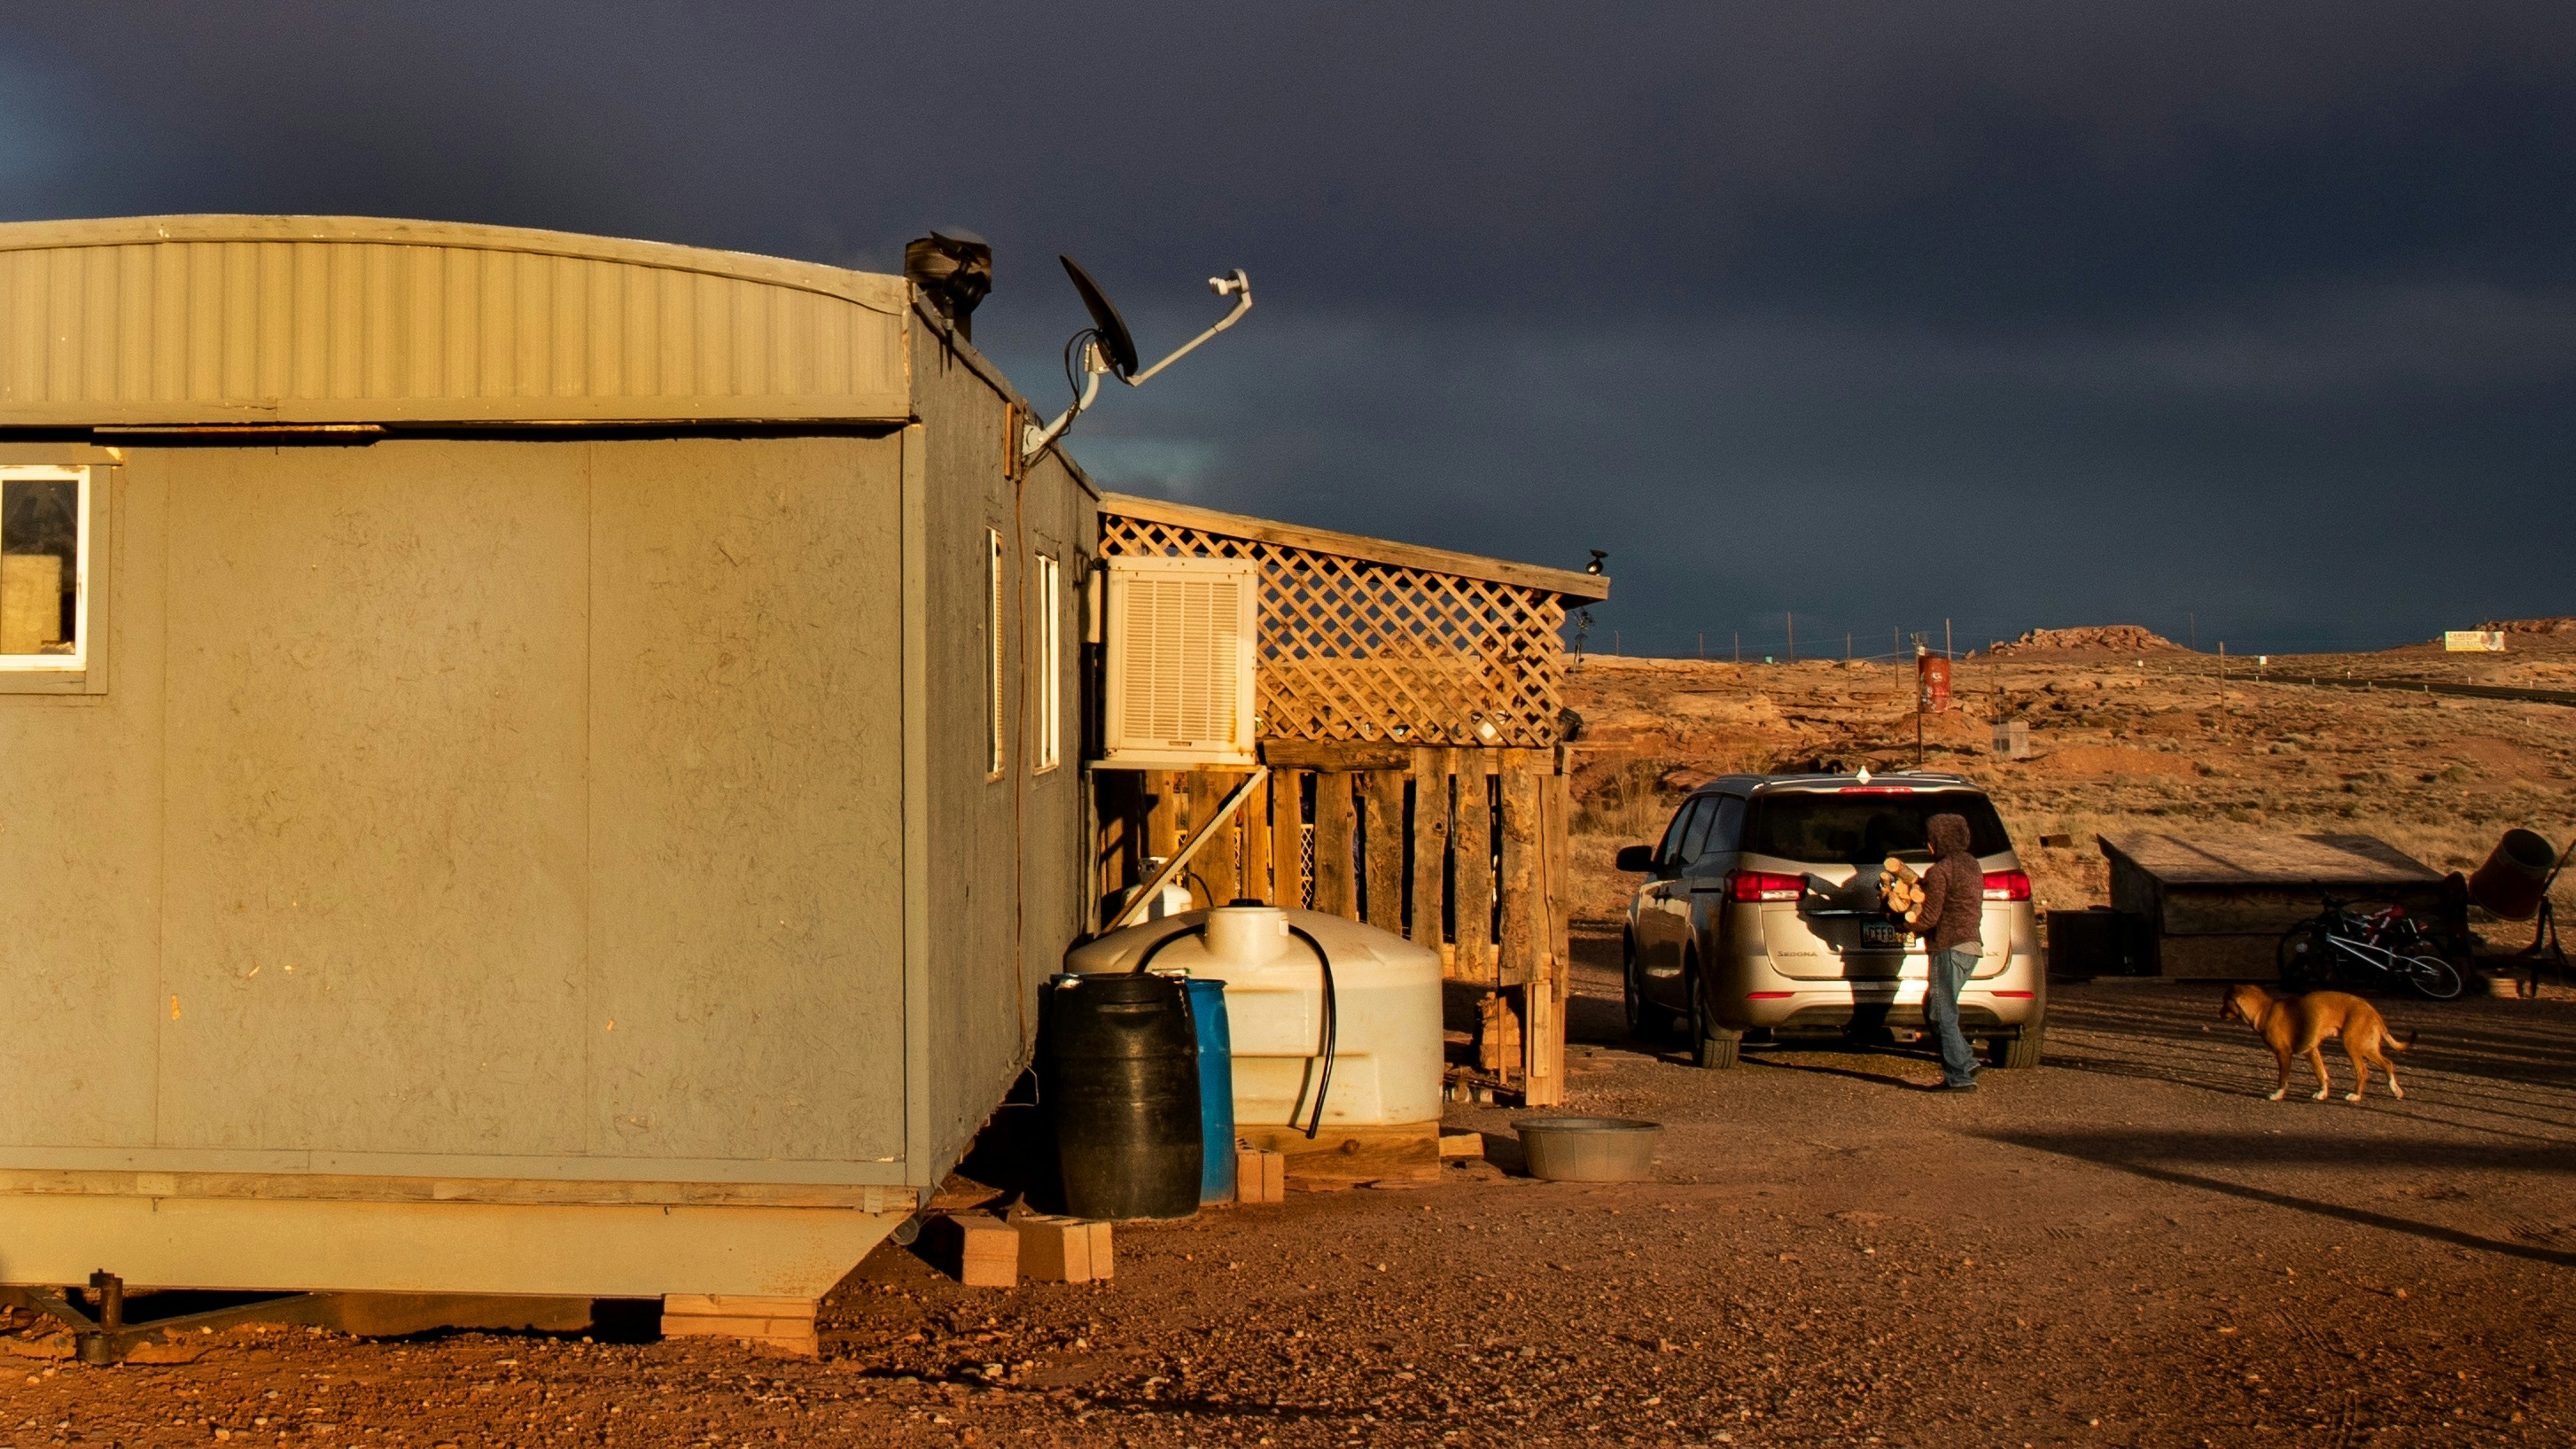 A Navajo woman carries wood to heat her rural mobile home during the coronavirus pandemic in Cameron, Arizona.